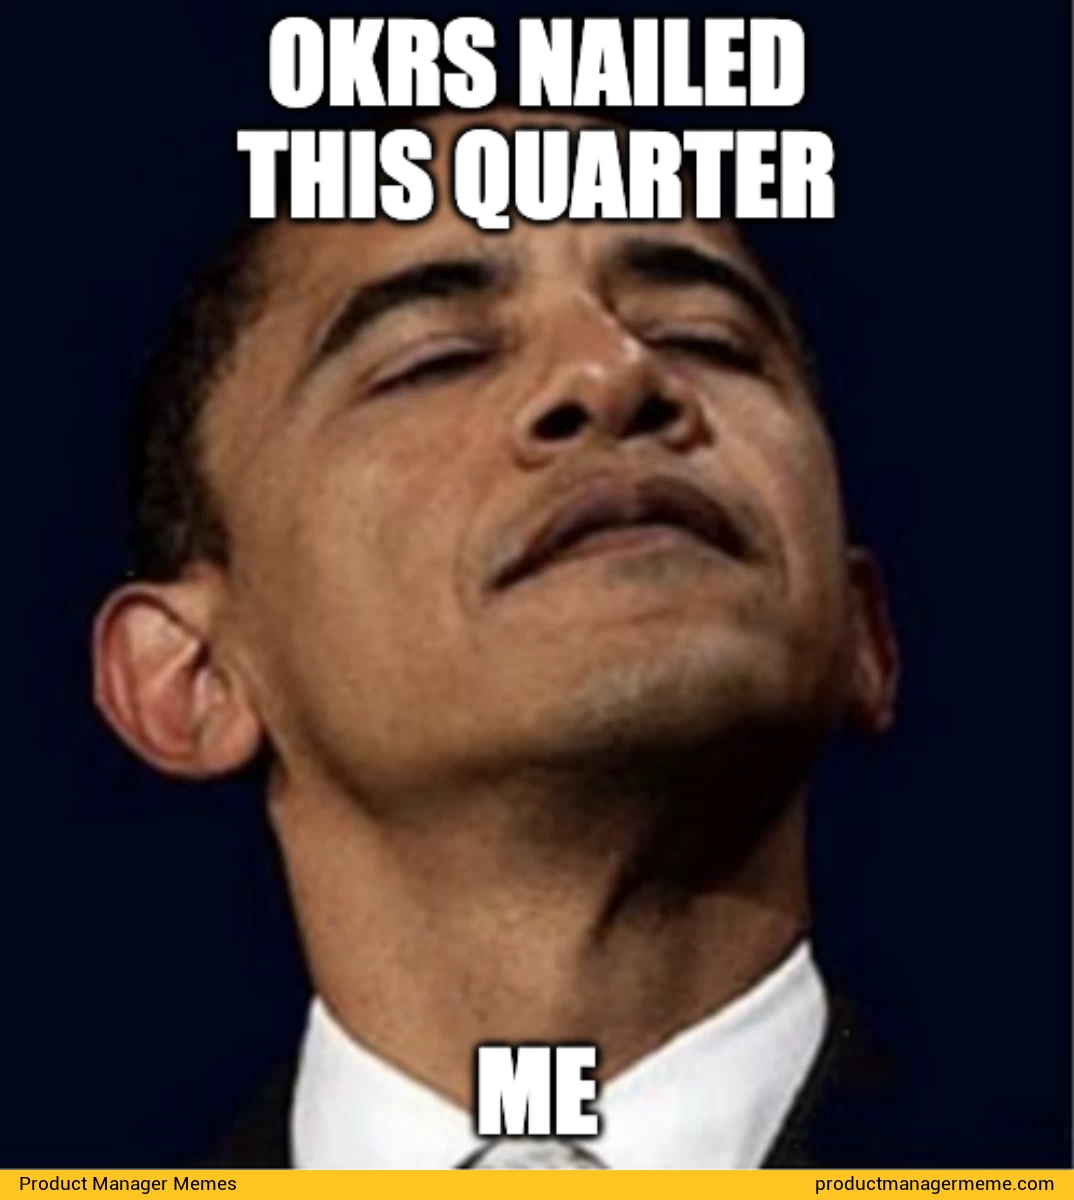 OKRs Nailed this Quarter - Product Manager Memes